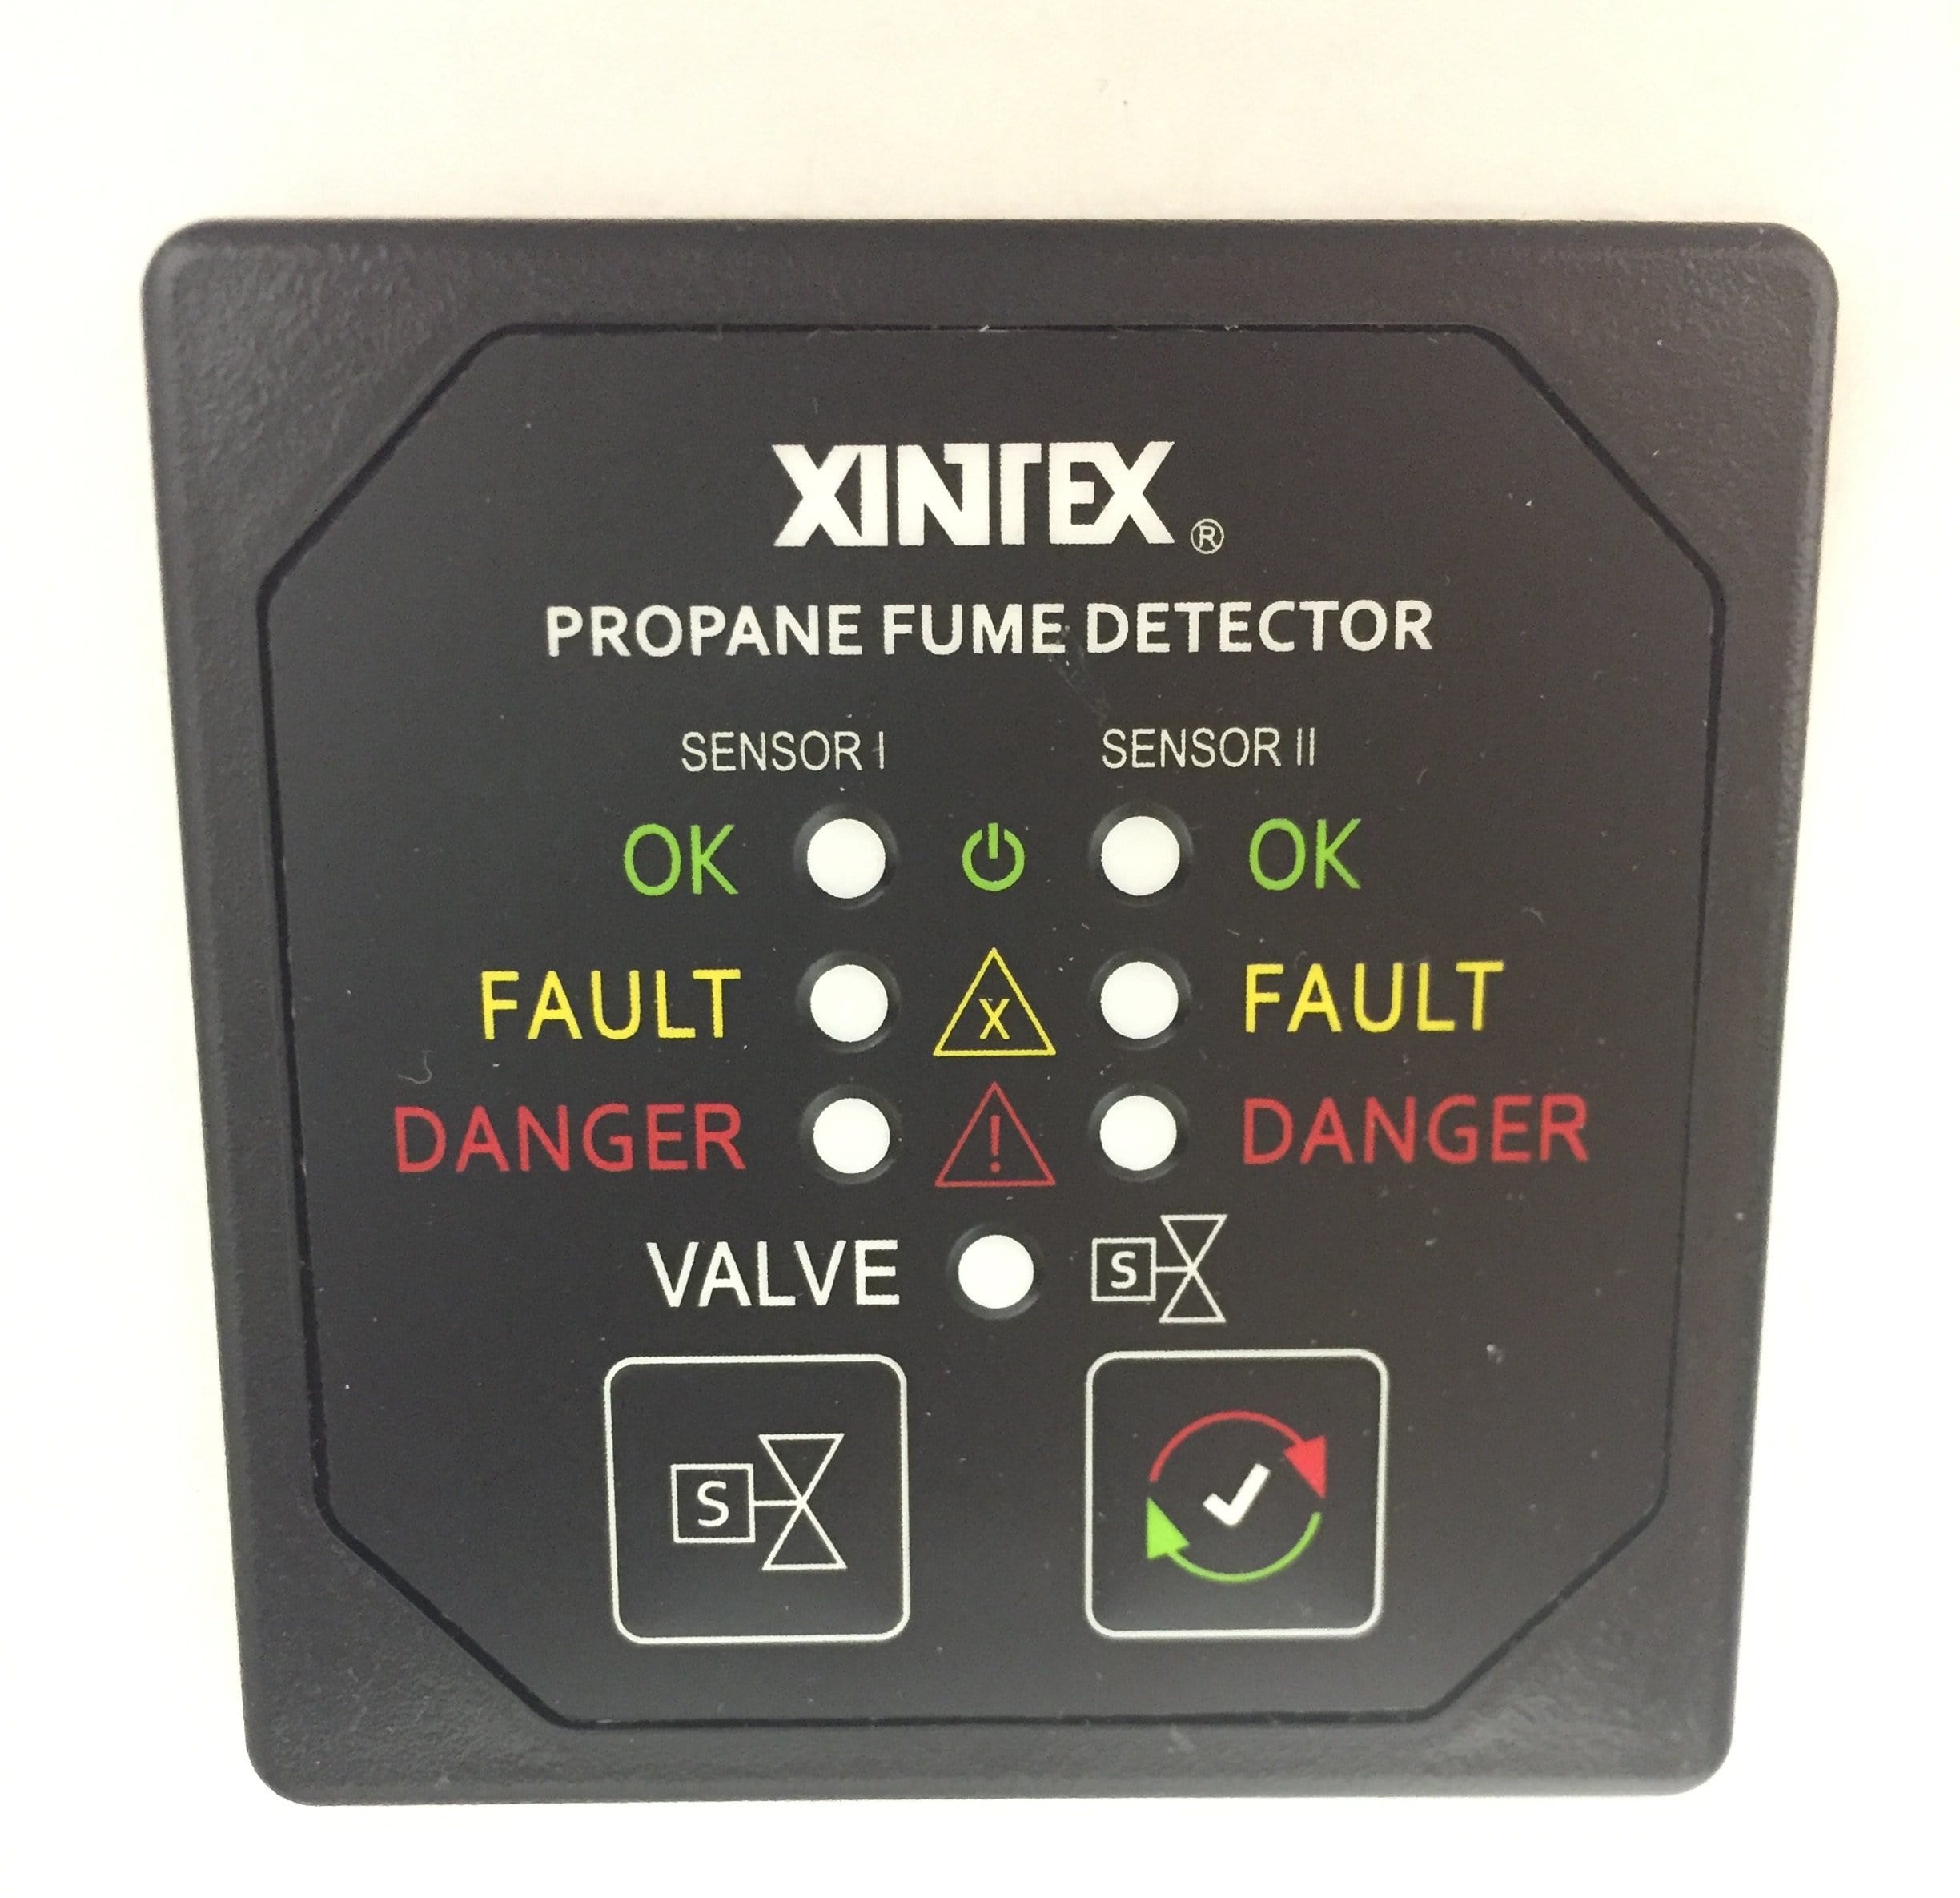 Fireboy-Xintex P-2BS-R Propane Fume Detector, Two Channel with (2) Sensors, SV, and Valve Control with 20 ft. Cable